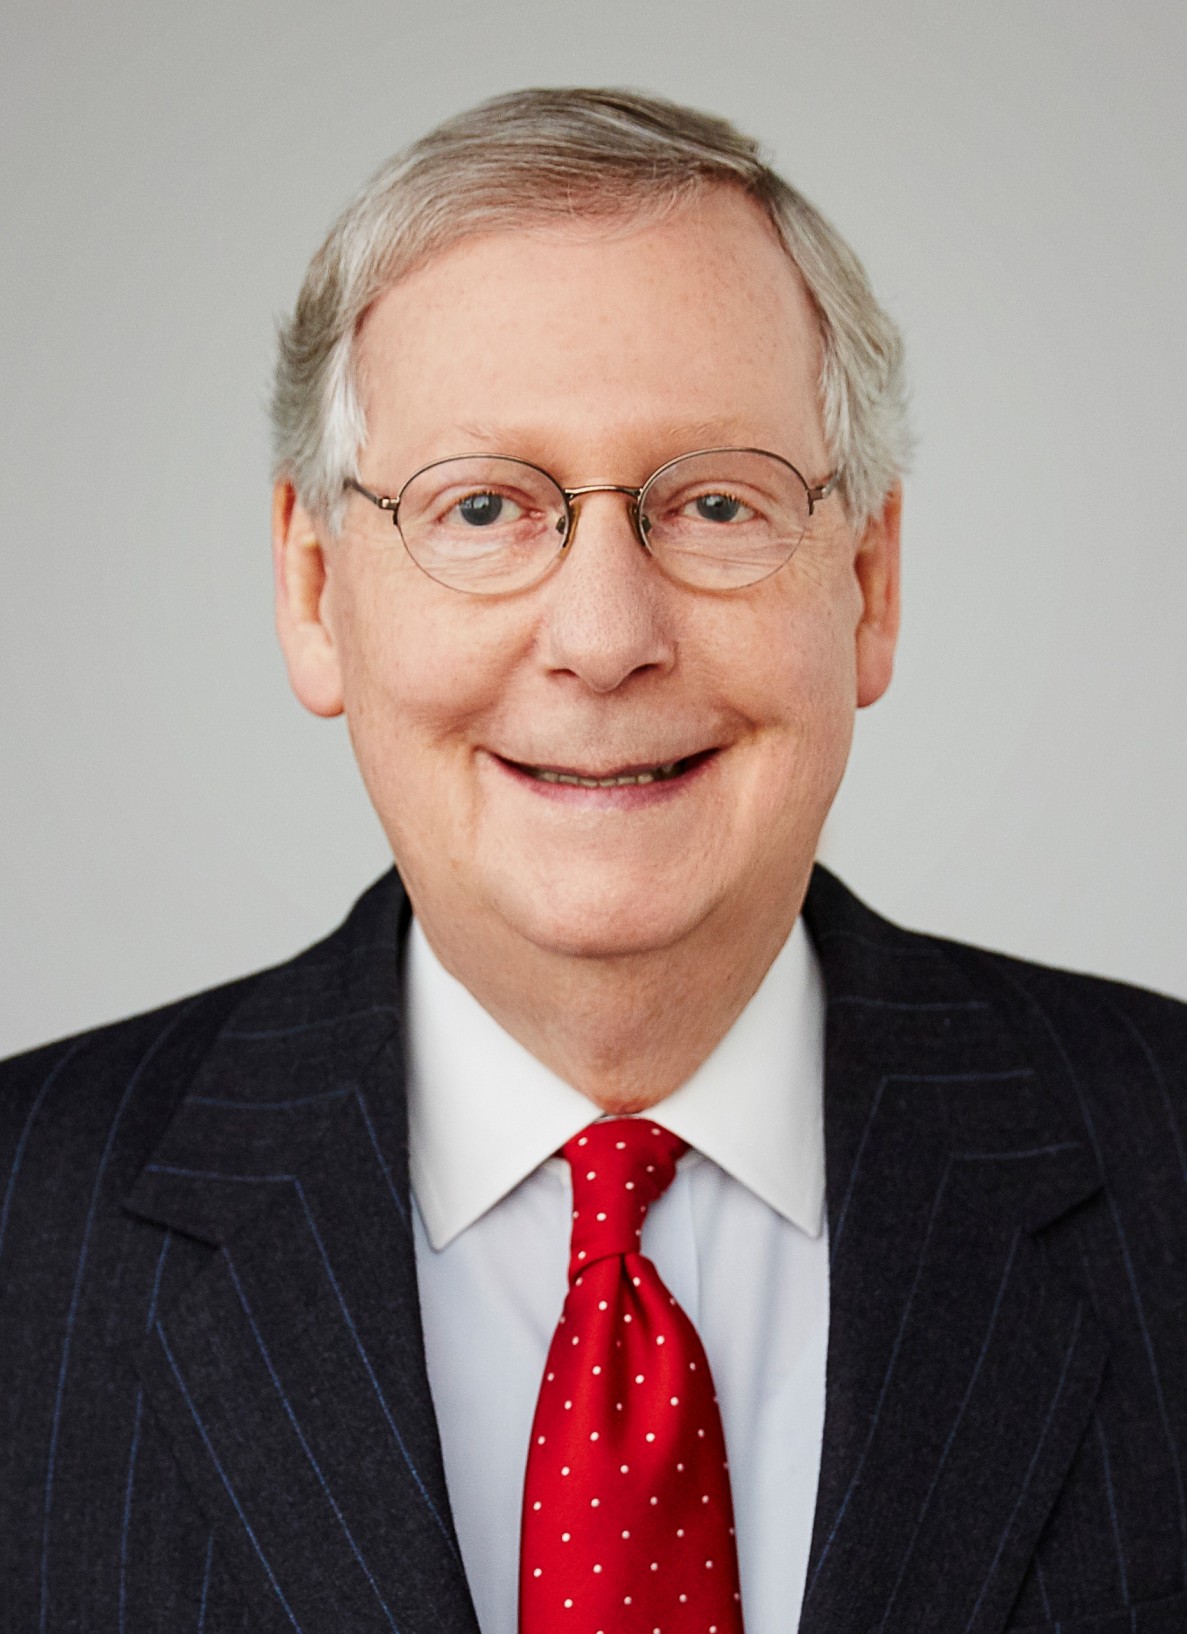 How tall is Mitch McConnell?